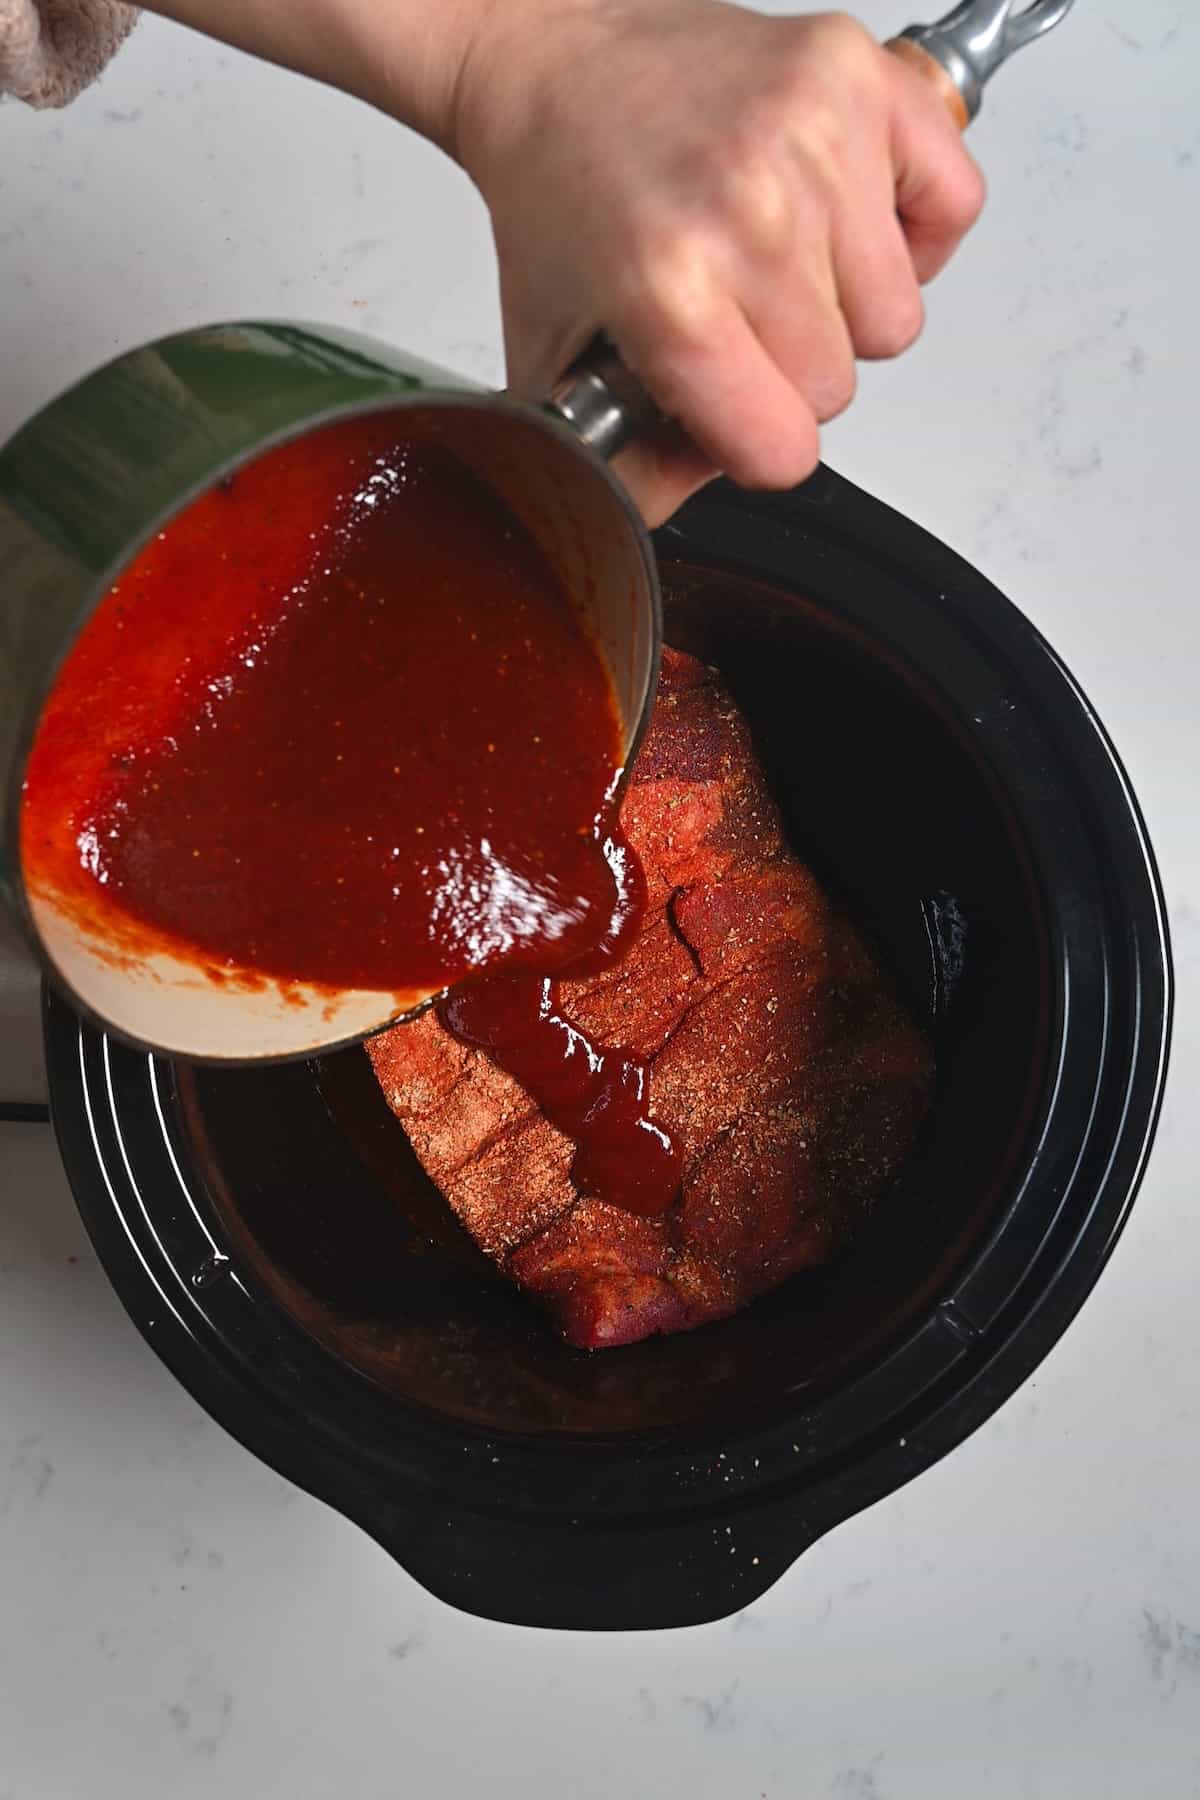 Pouring BBQ sauce over a brisket